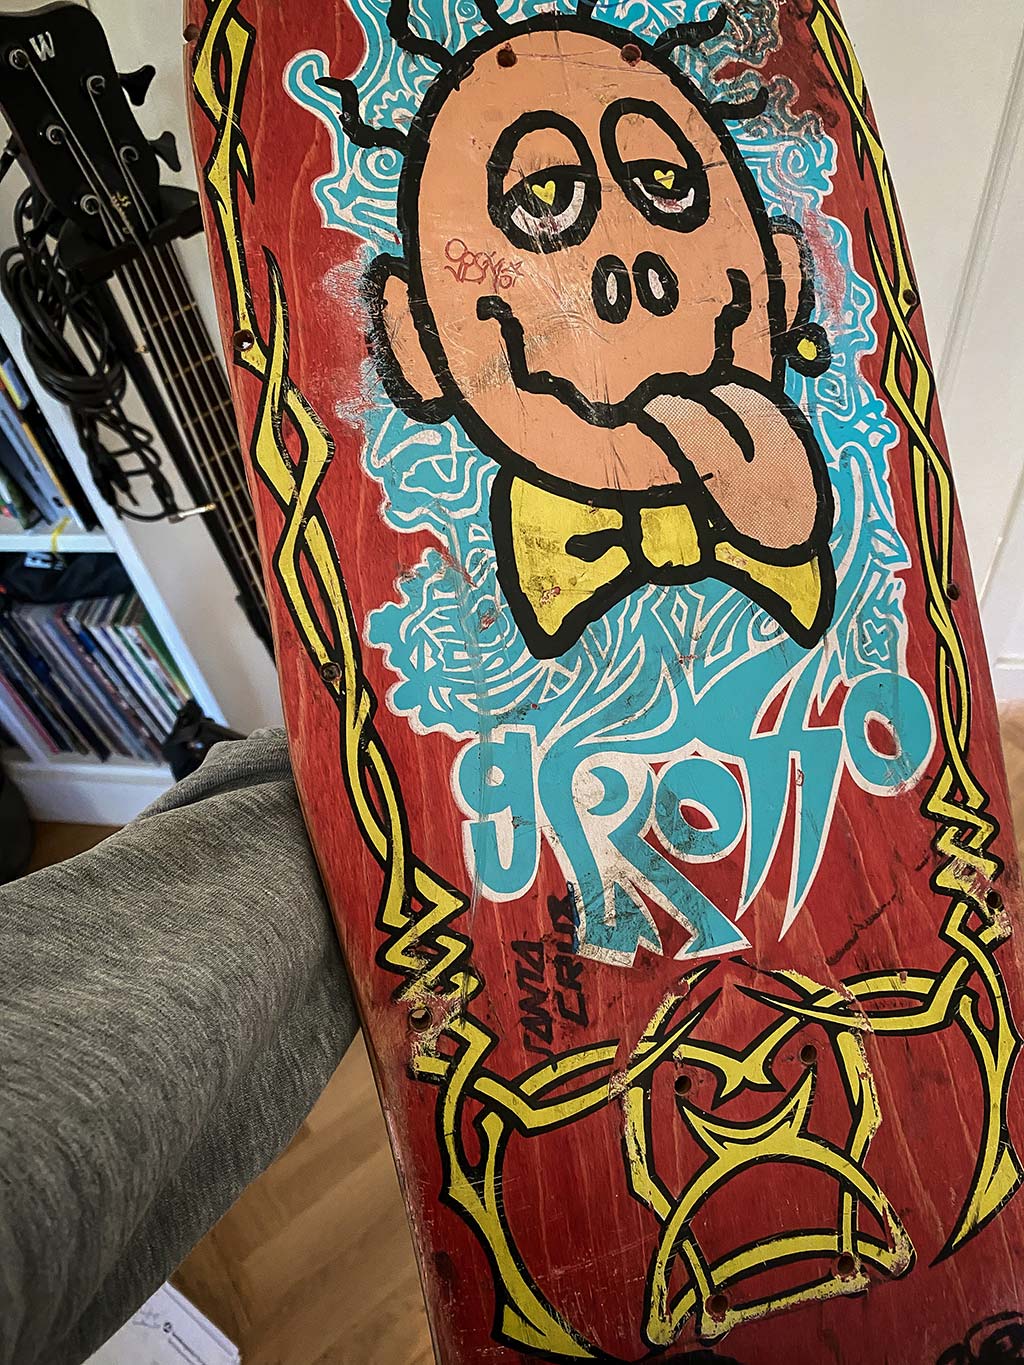 A photo of an old skateboard of mine by Jeff Grosso